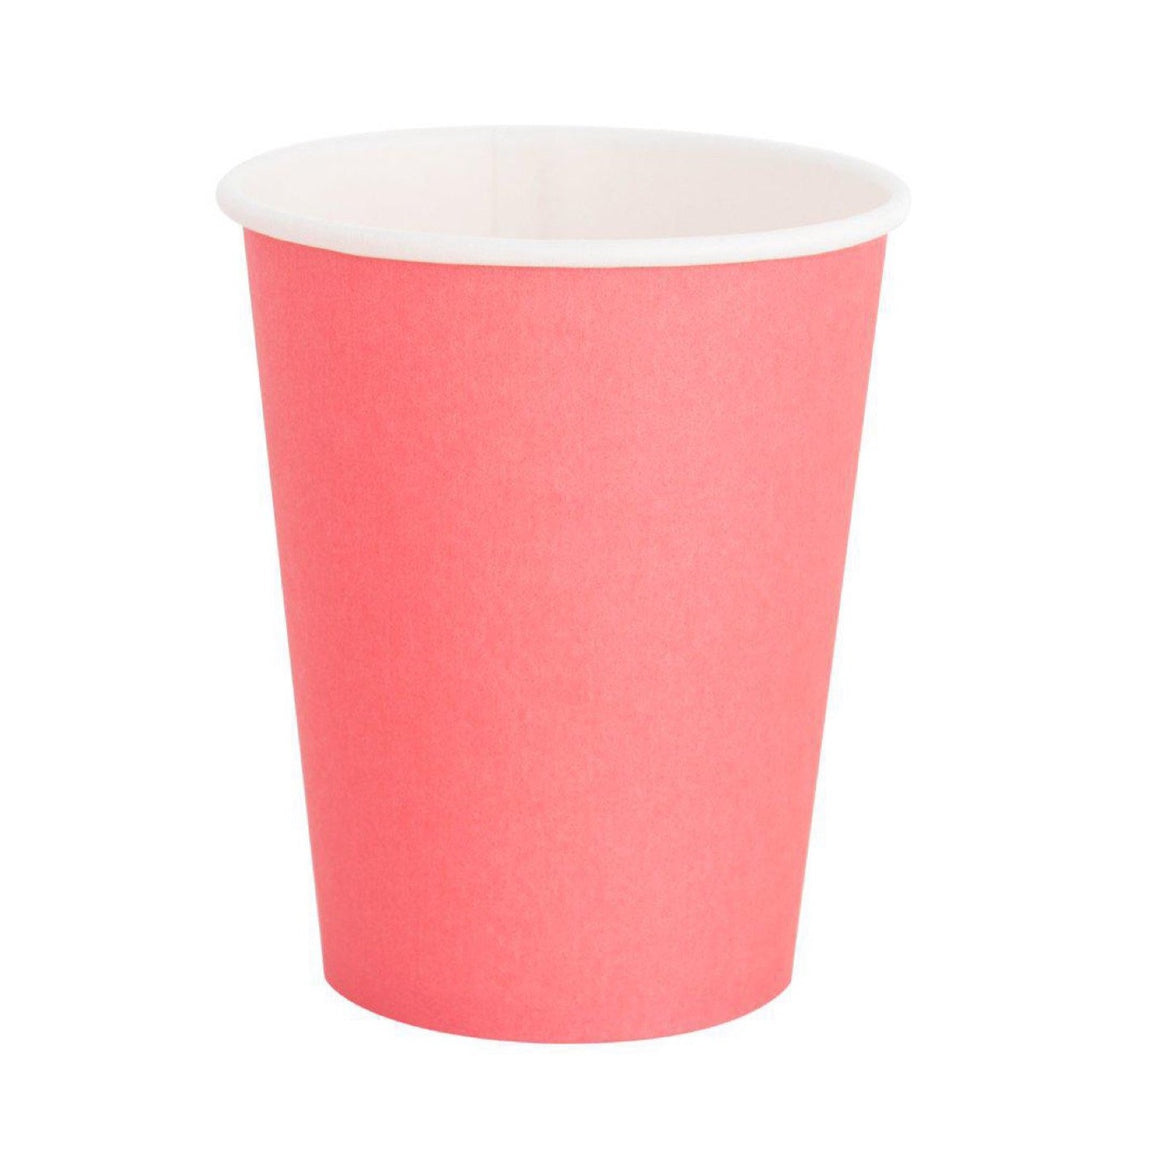 CUPS - PINK CORAL OH HAPPY DAY